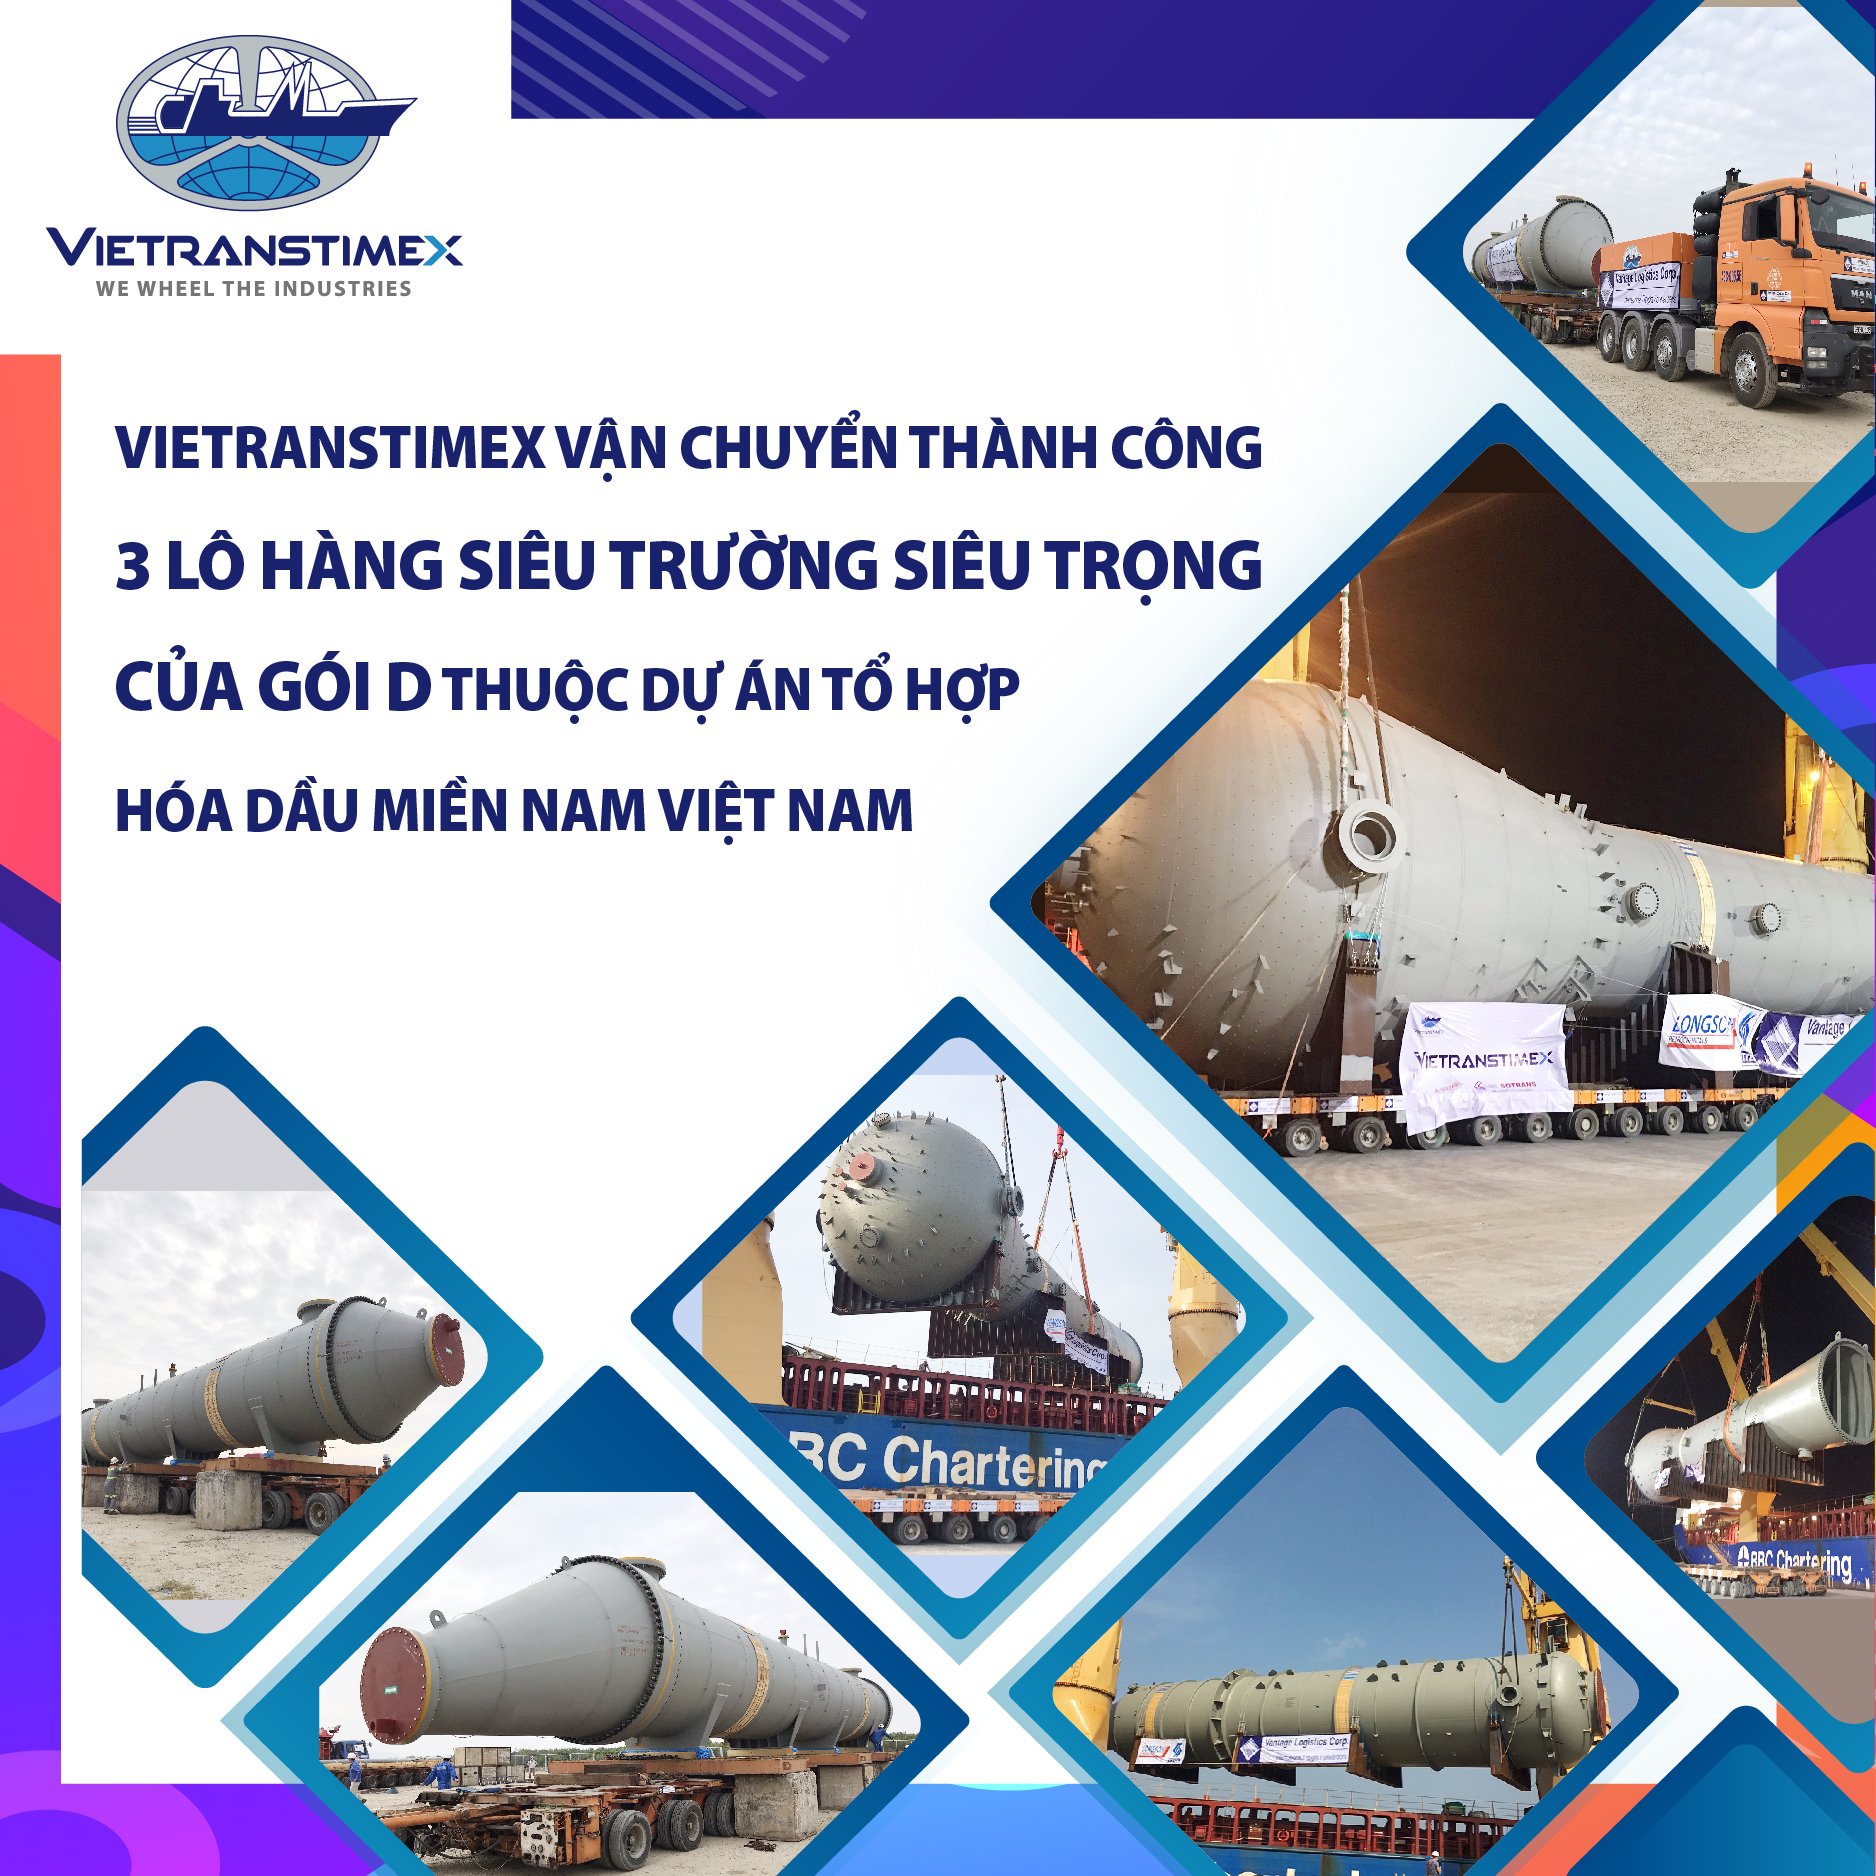 Vietranstimex Sucessfully Transported 3 Bales Of Oversize Overweight Cargoes Of Package D Under Petrolimex Complex In The South Of Vietnam Project